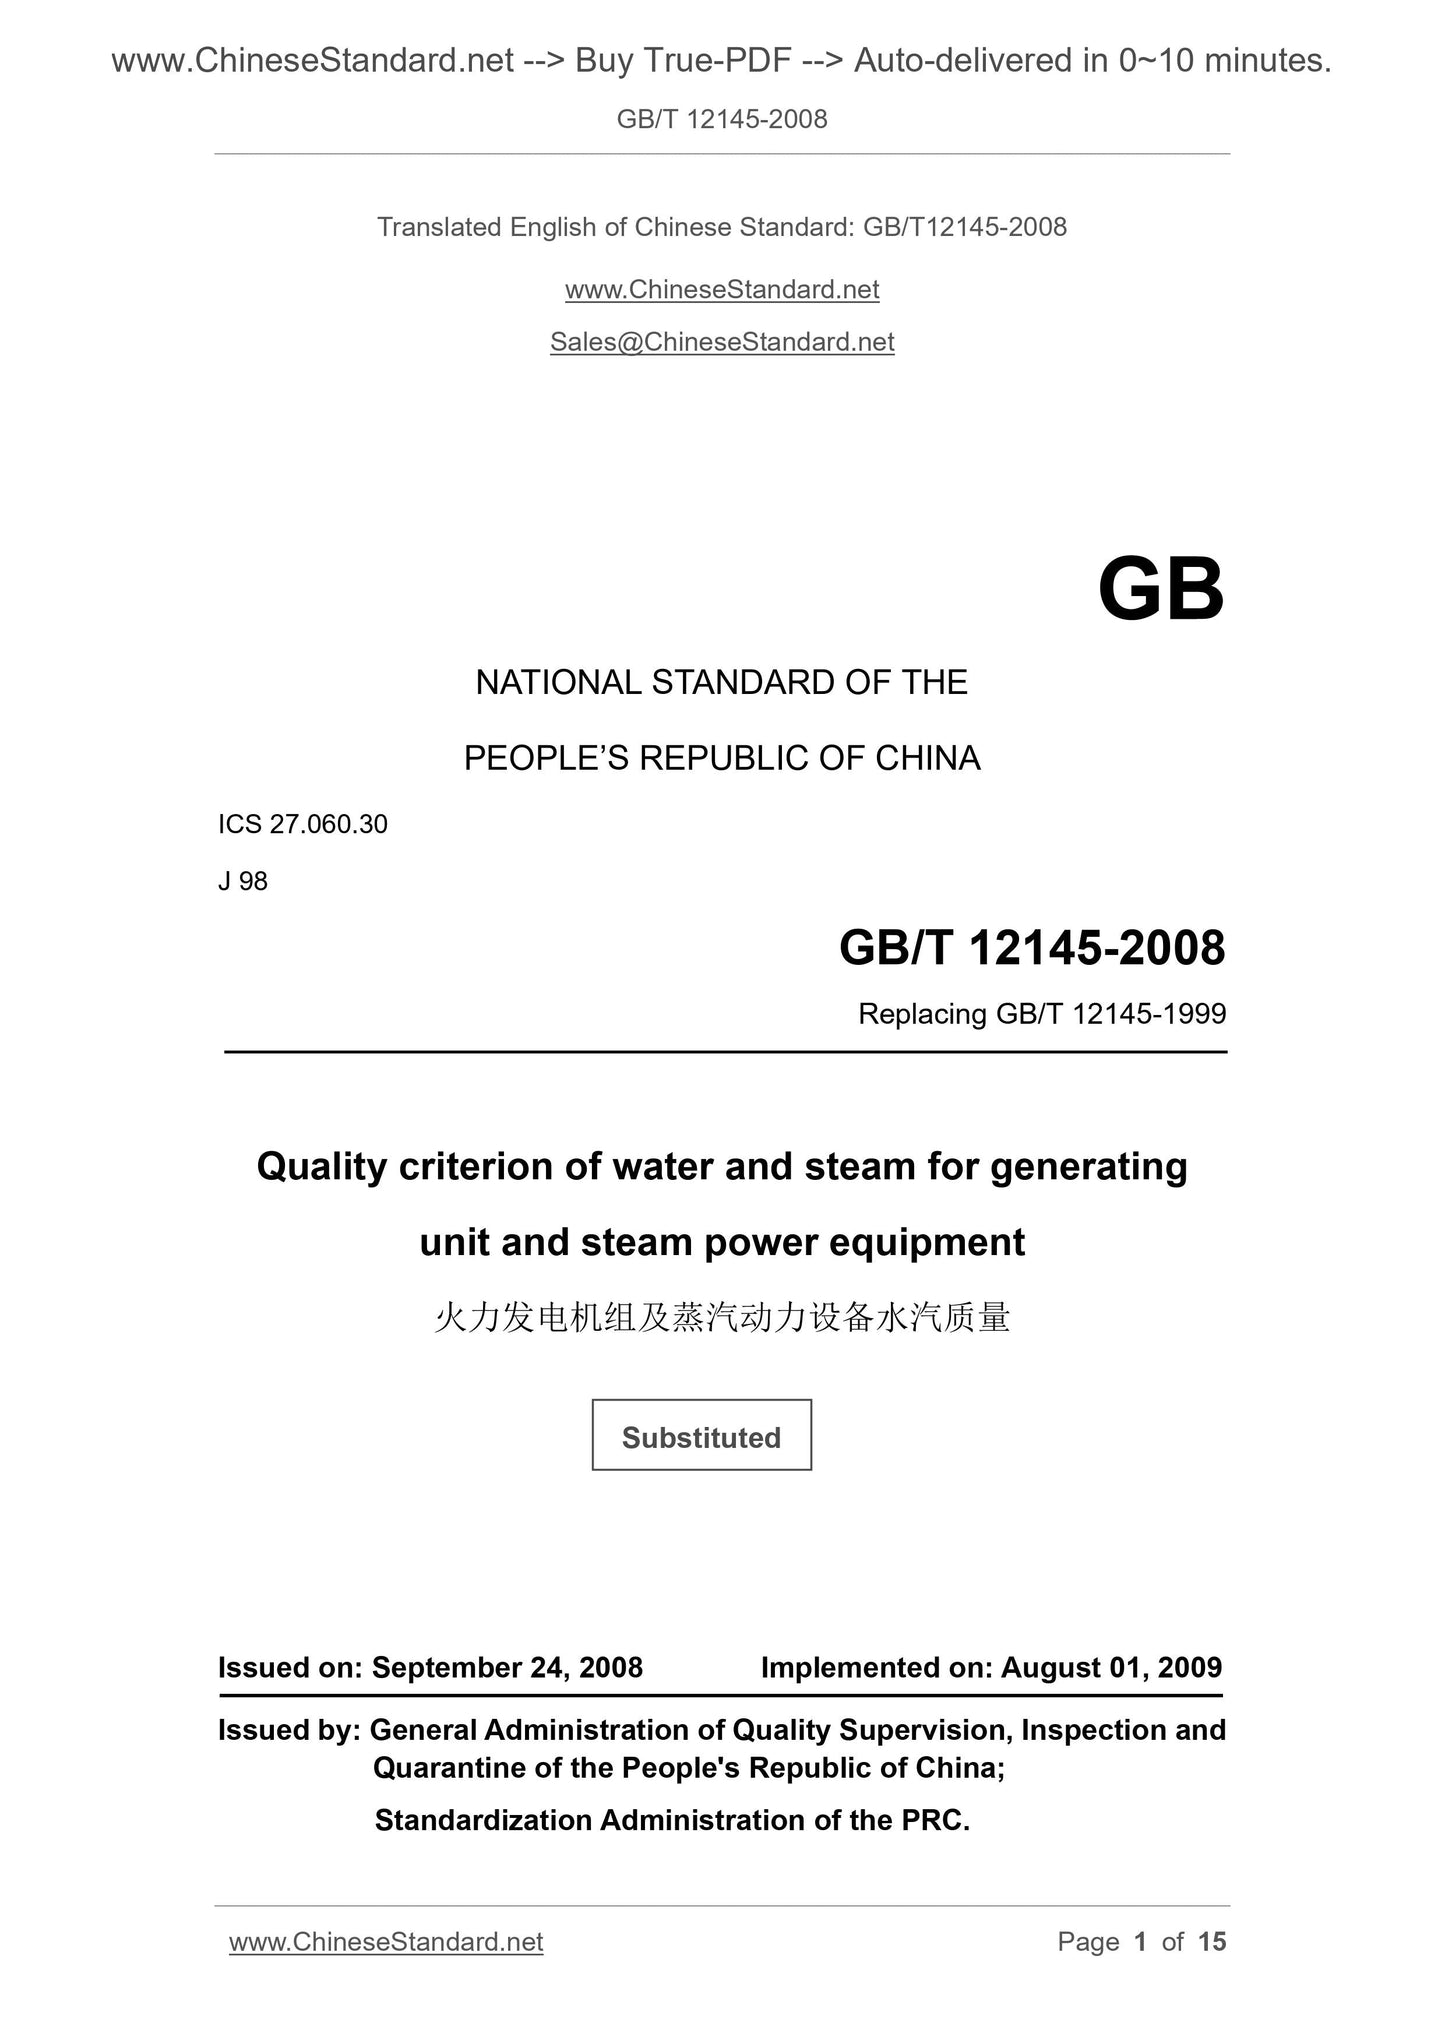 GB/T 12145-2008 Page 1